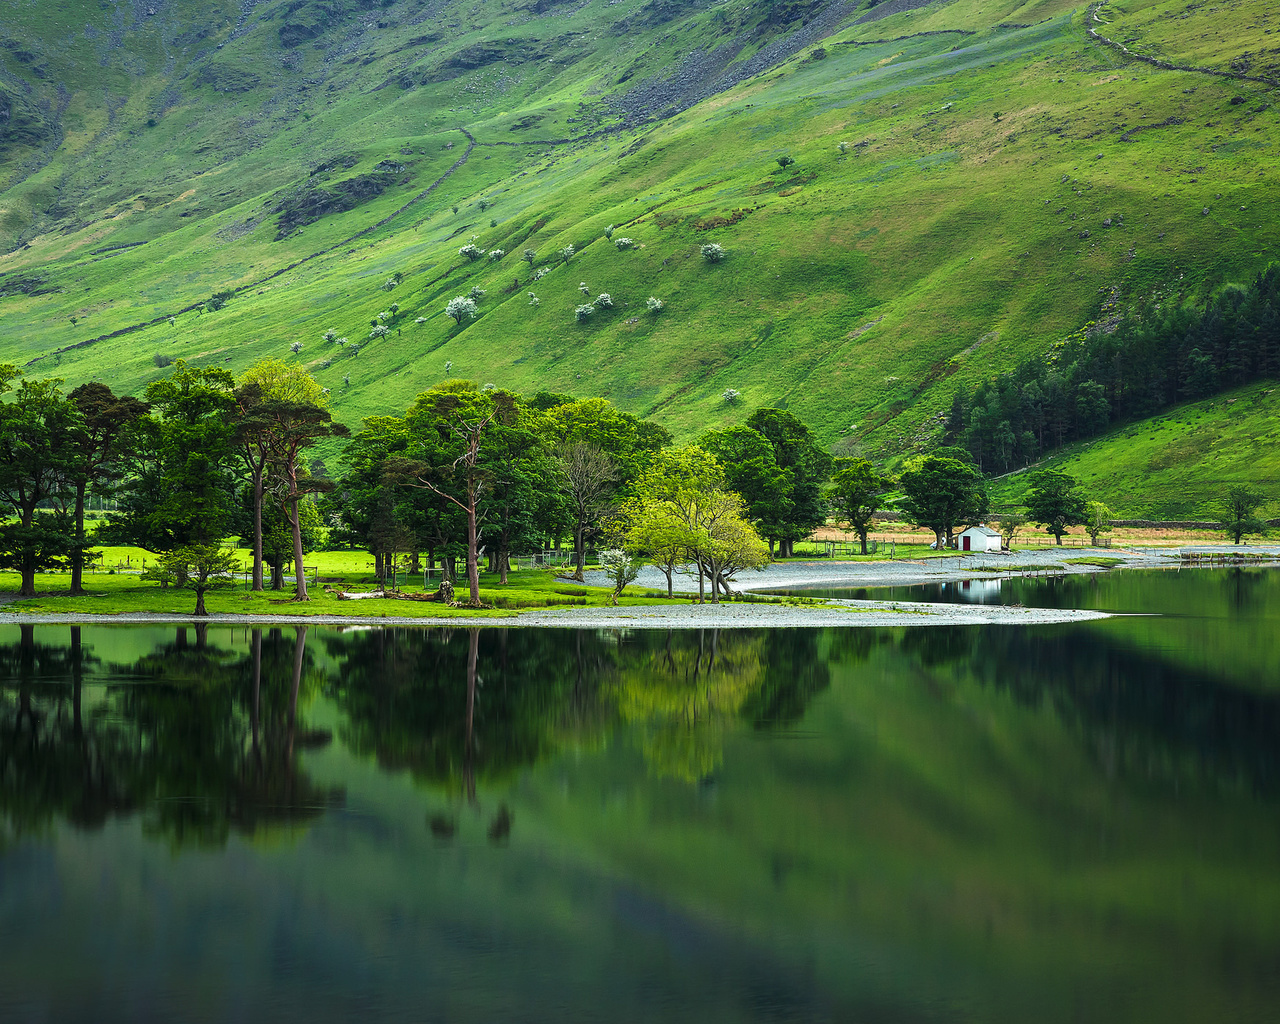 lake, reflection, trees, house, hills, trees, grass